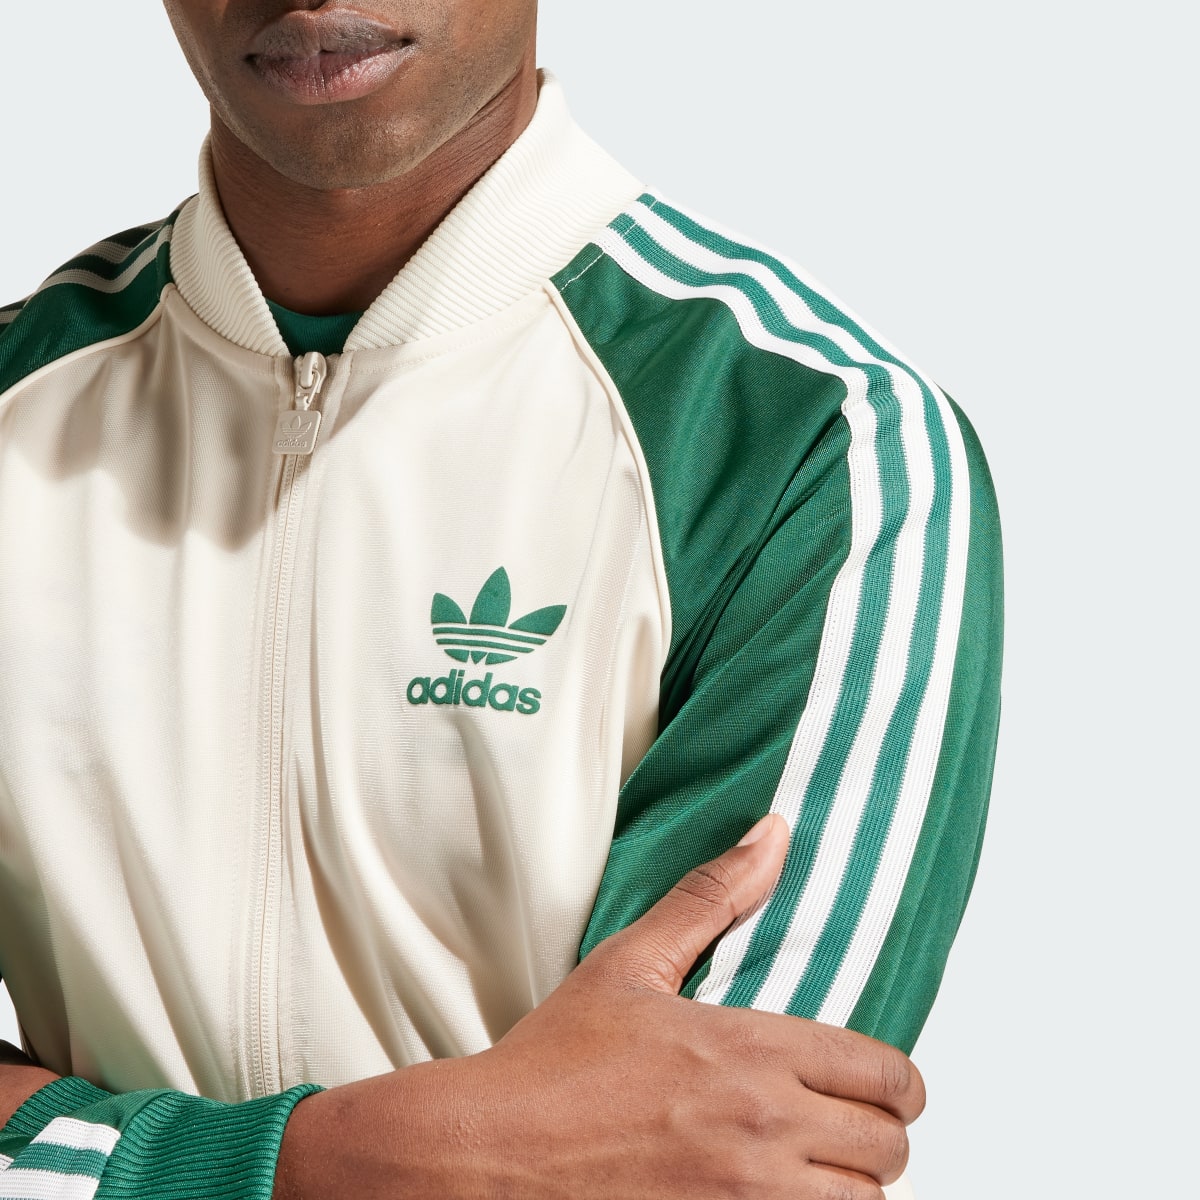 Adidas SST Track Top. 6